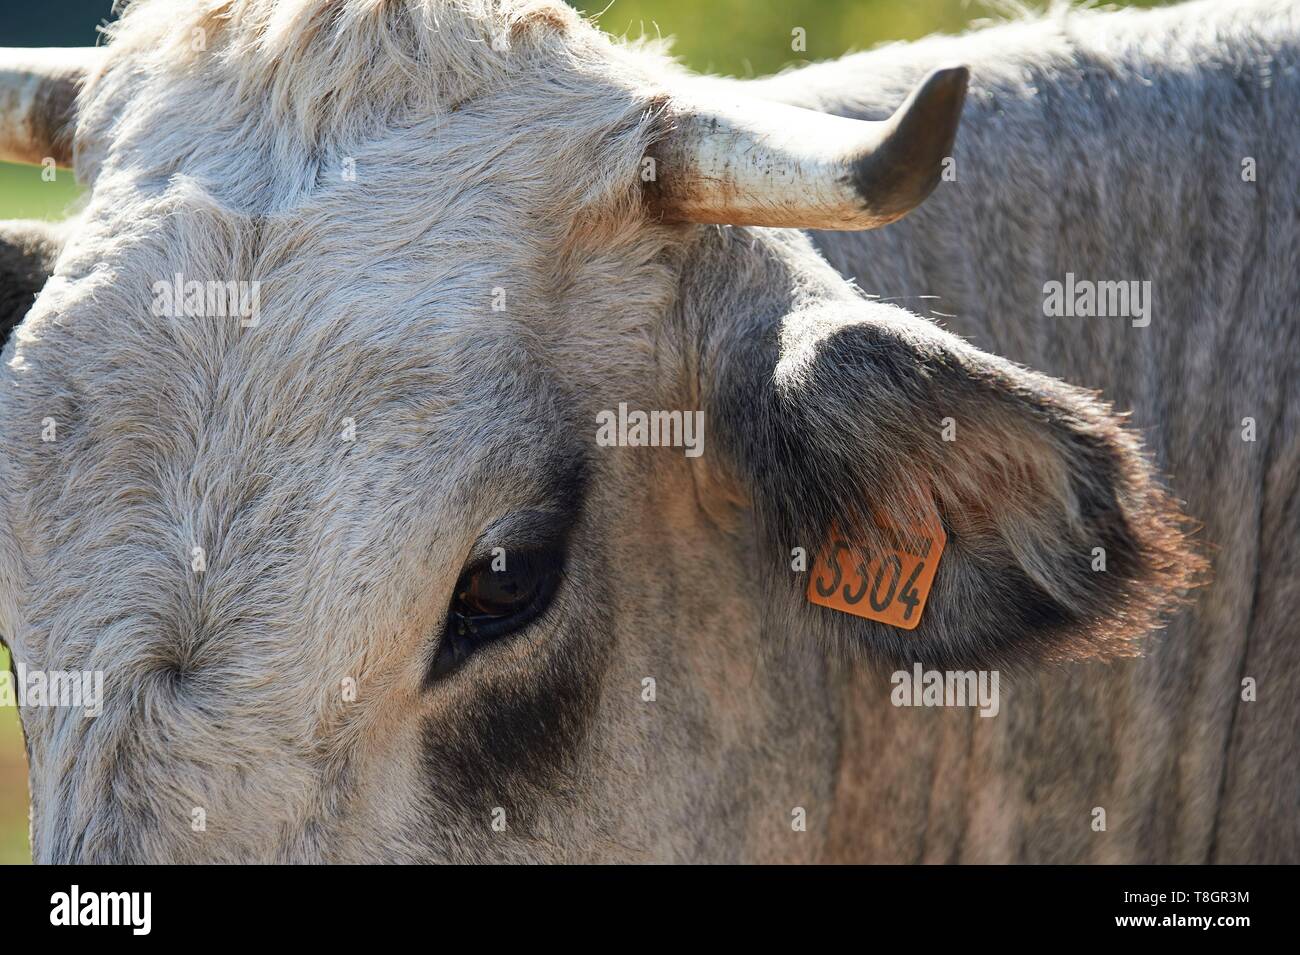 France, Ariege, Mas d'Azil, locality Lasserre, Vincent Dulac, Gascons breeder of cows Stock Photo